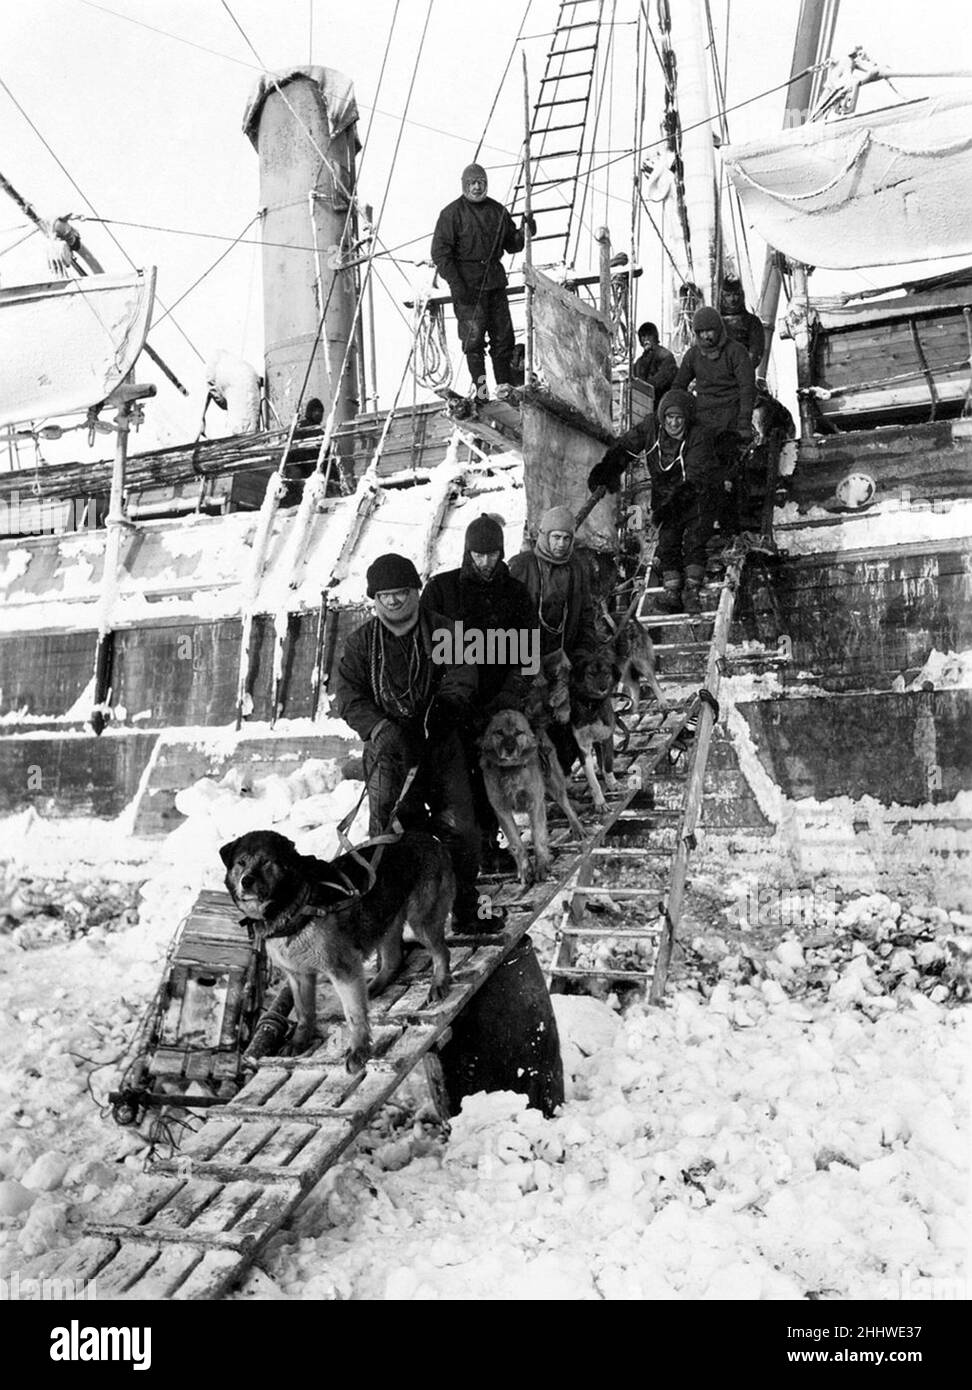 Ernest Shackleton's epic 1914-1917 antarctic expedition, in which their ship Endurance was crushed by ice. The crew are seen with their dogs Stock Photo